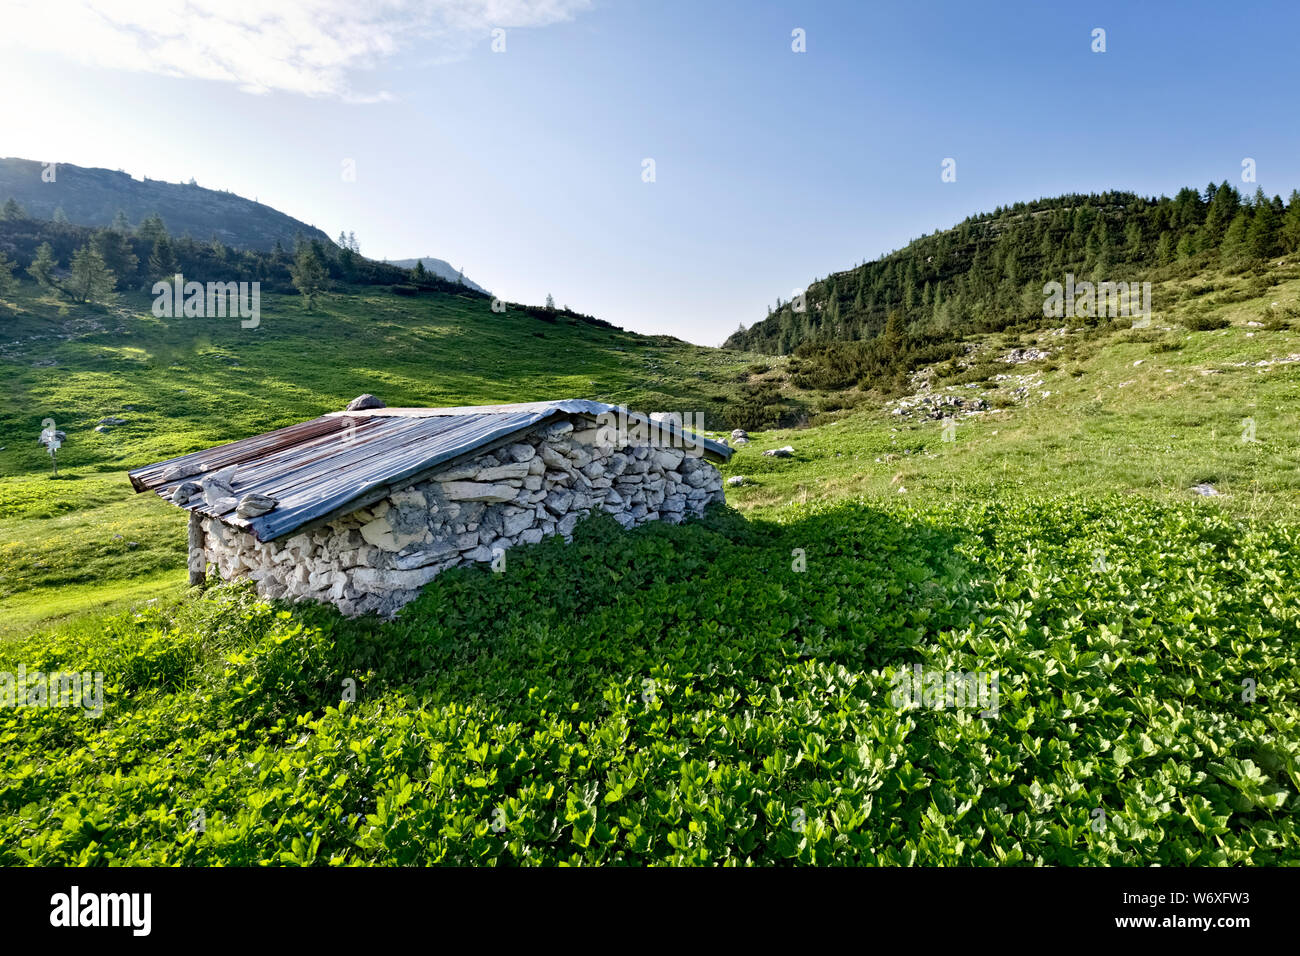 The 'Ortigara hut' and the Agnelizza valley: one of the bloodiest battlefields of the Great War on the Italian front. Asiago, Italy. Stock Photo